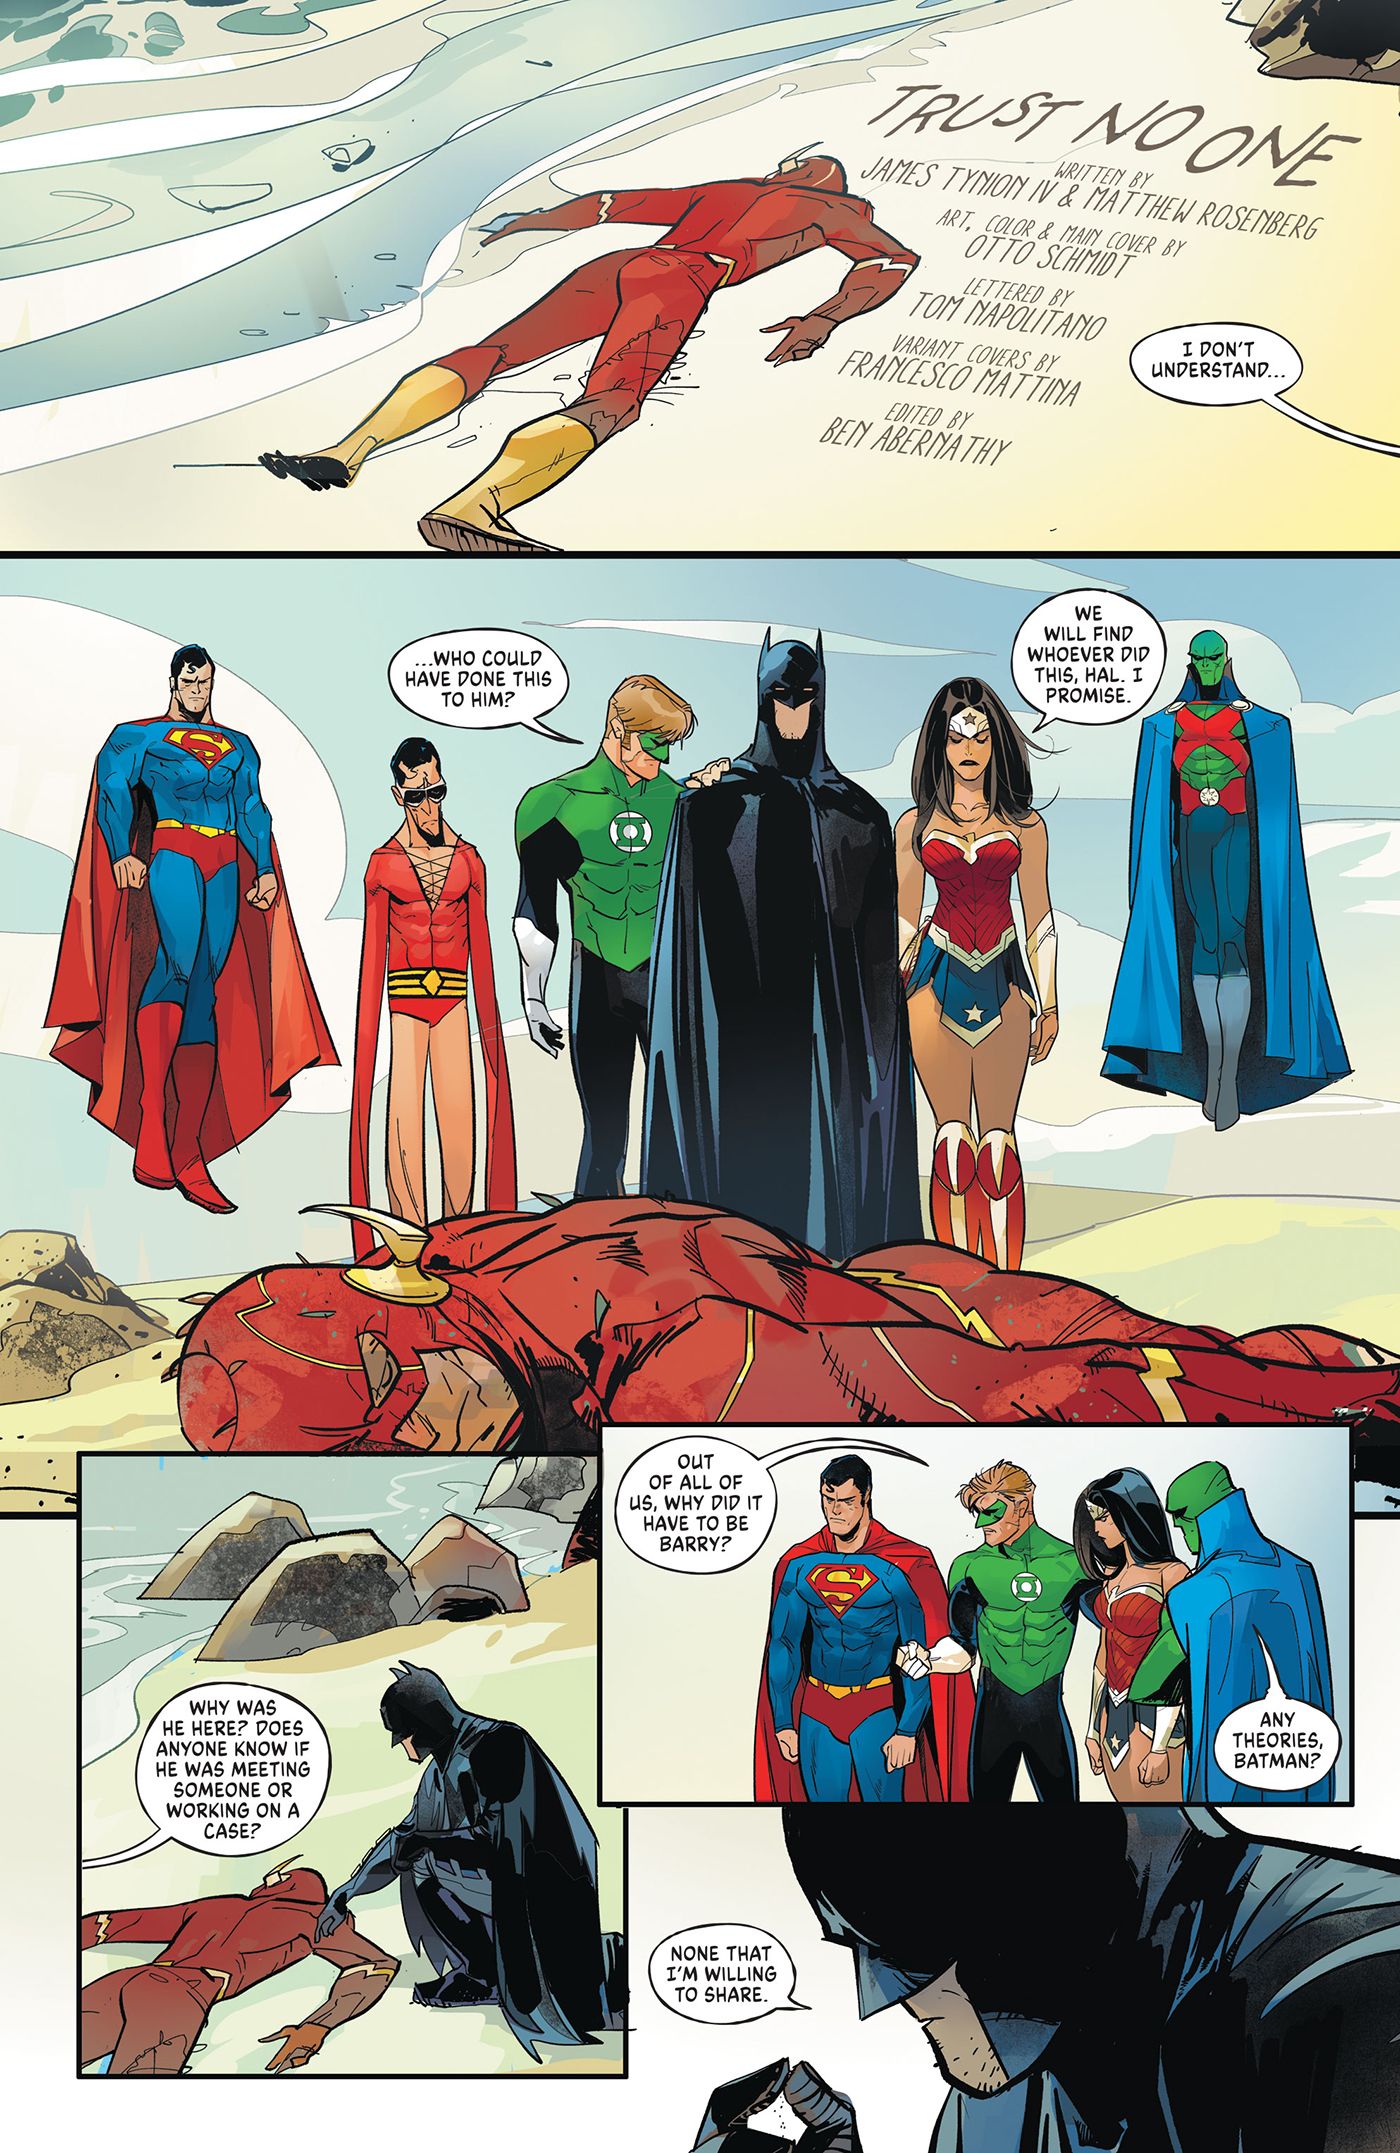 The Justice League look over Barry Allen's dead body on a beach.